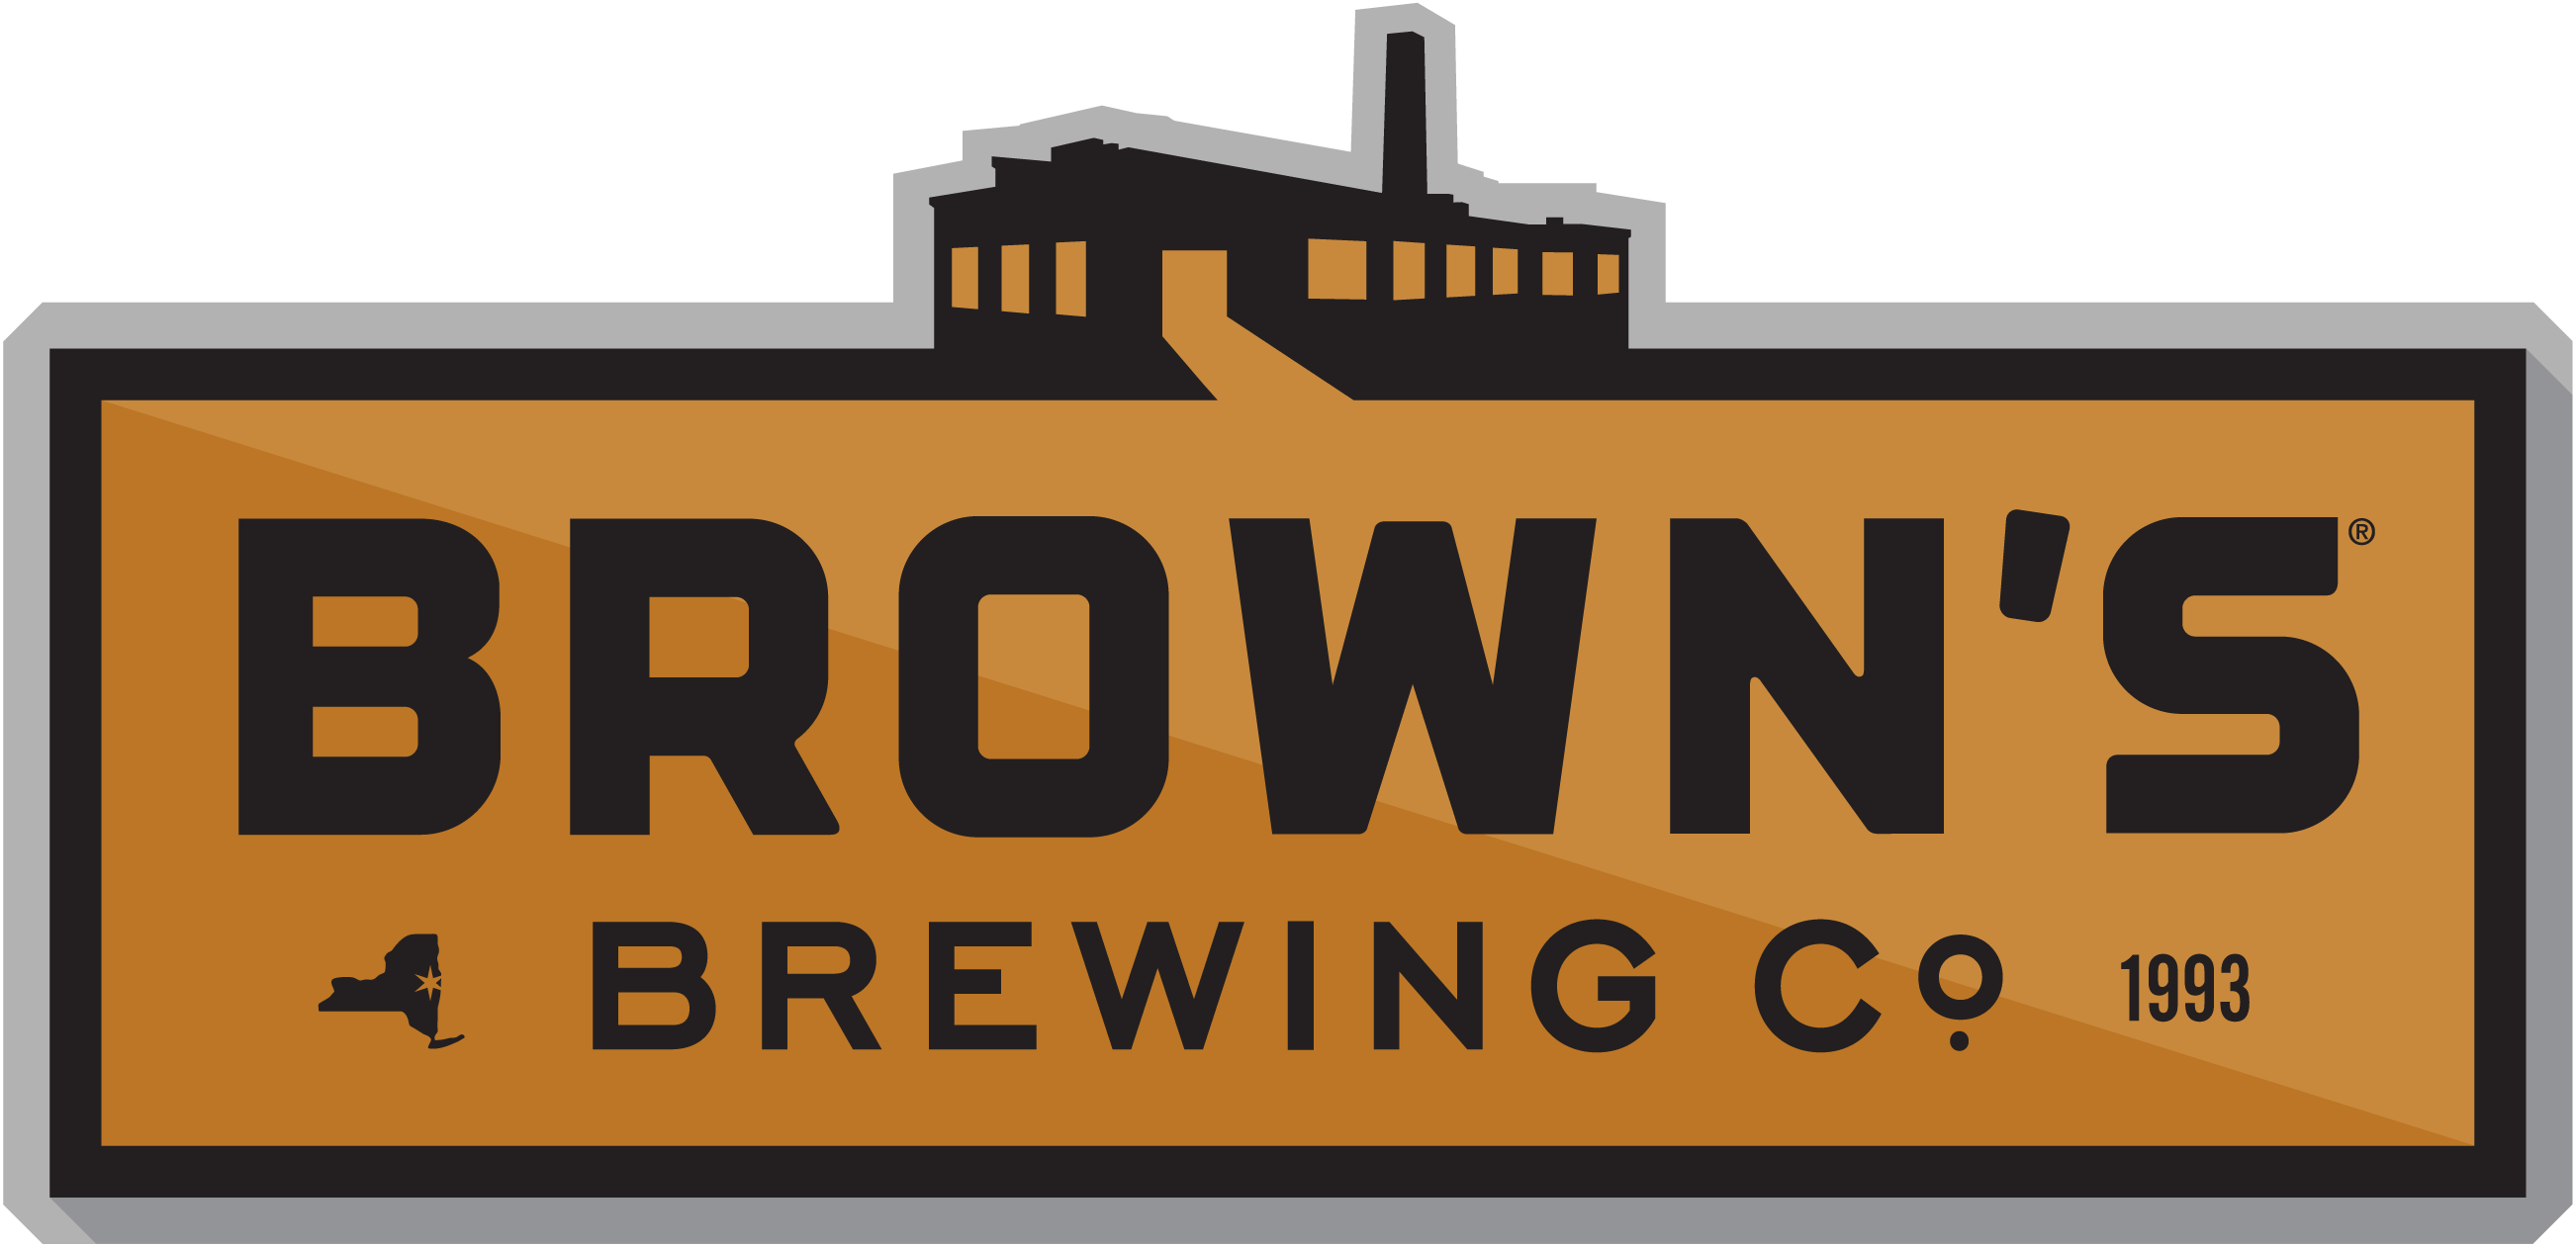 Beer Company Logo - Brown's Brewing Co. – Independently crafted beer since 1993